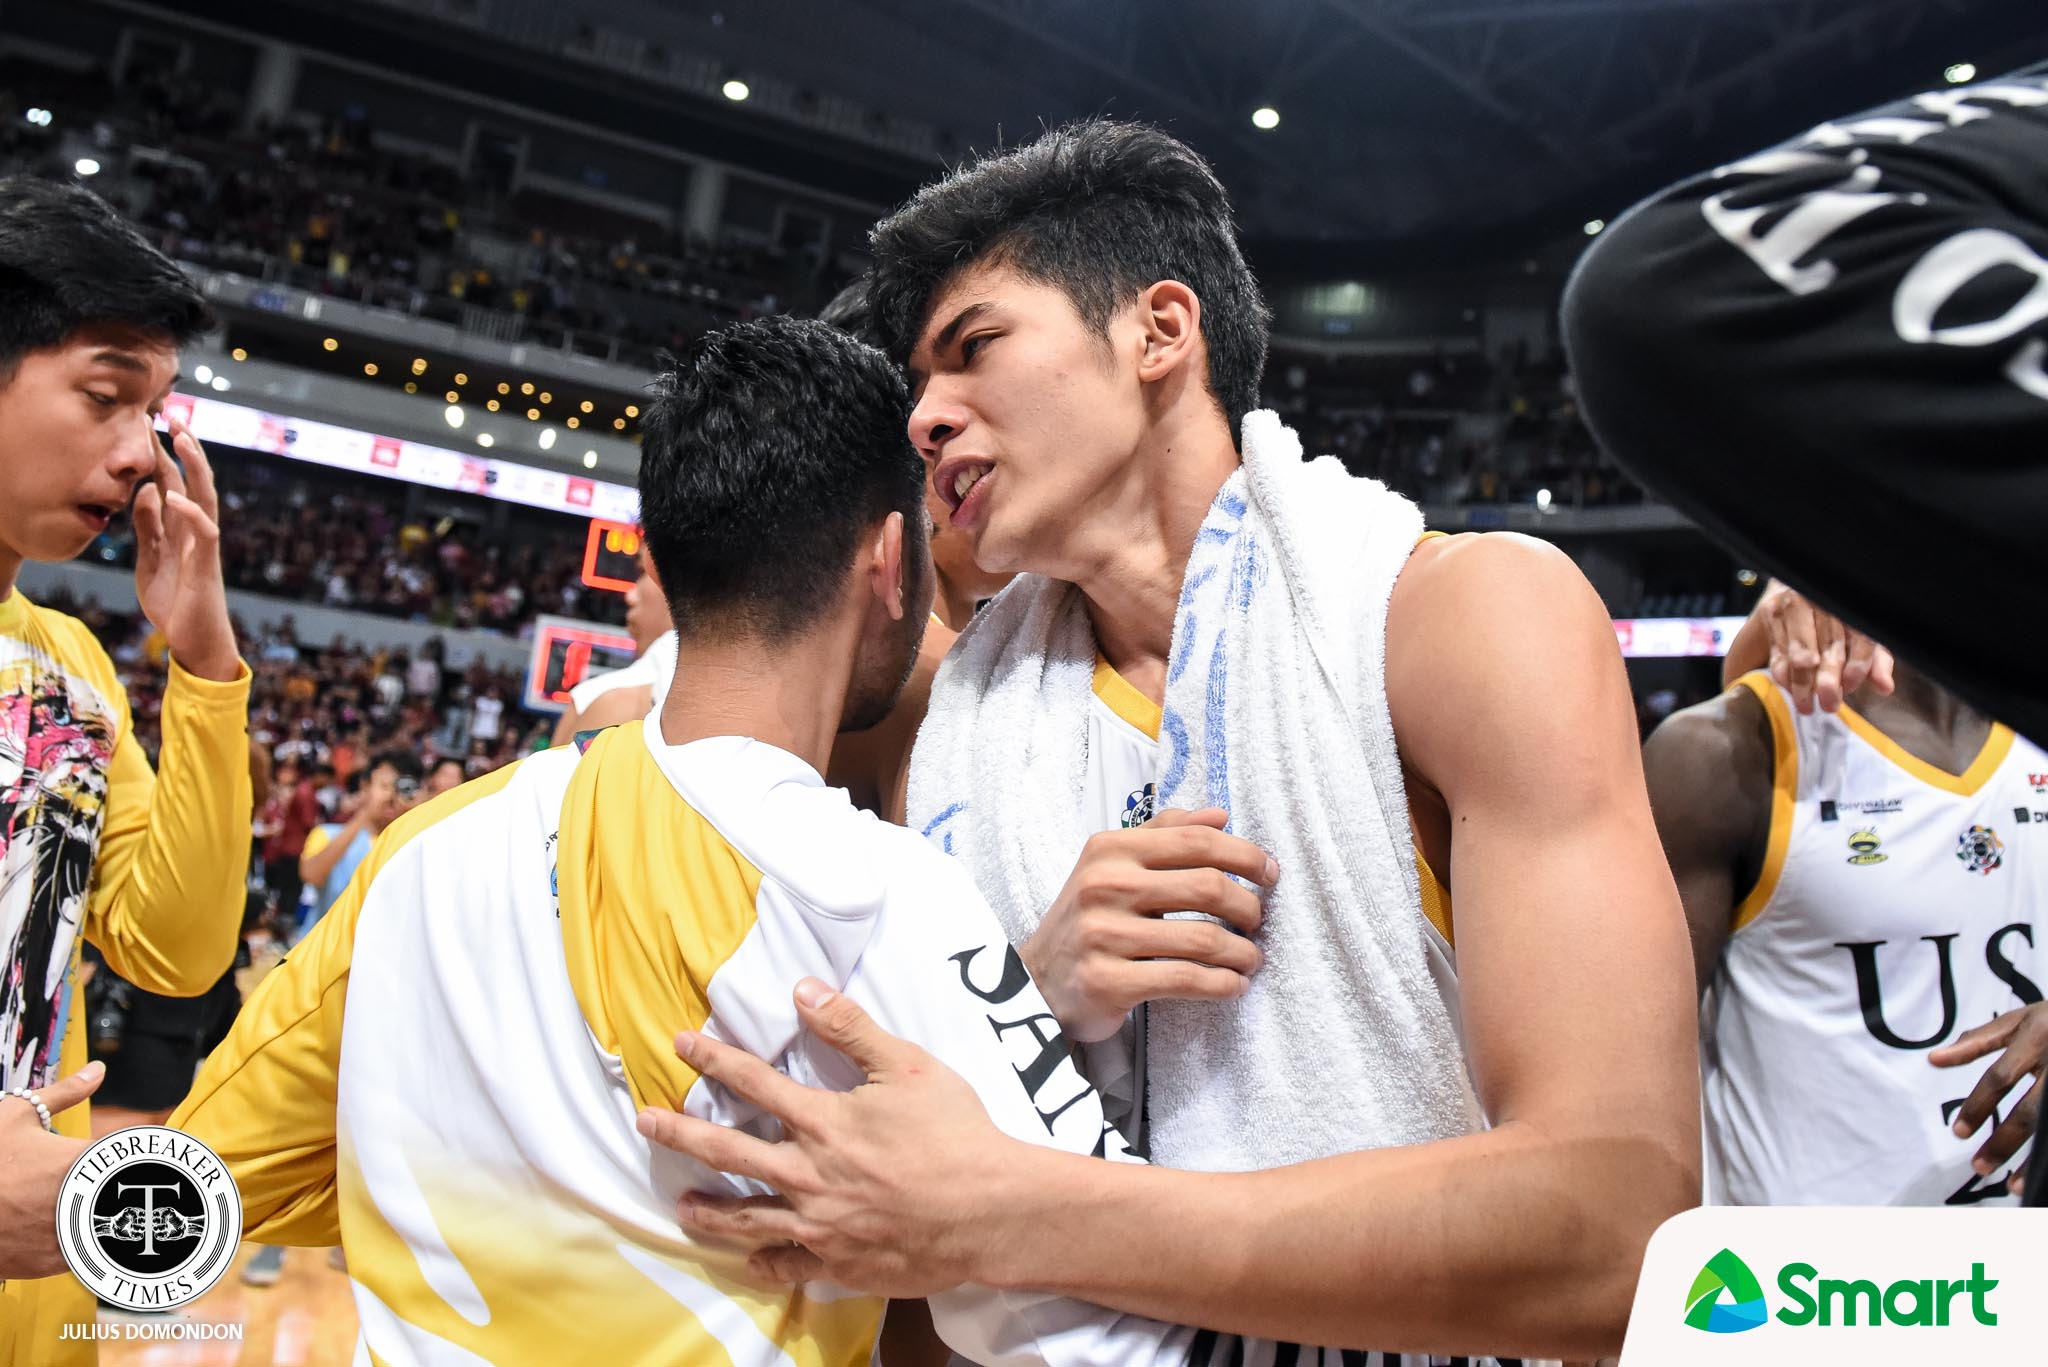 UAAP82-MBB-19TH-PHOTO-UST-CANSINO Destiny led CJ Cansino to UP, first taste of title Basketball News UAAP UP  - philippine sports news